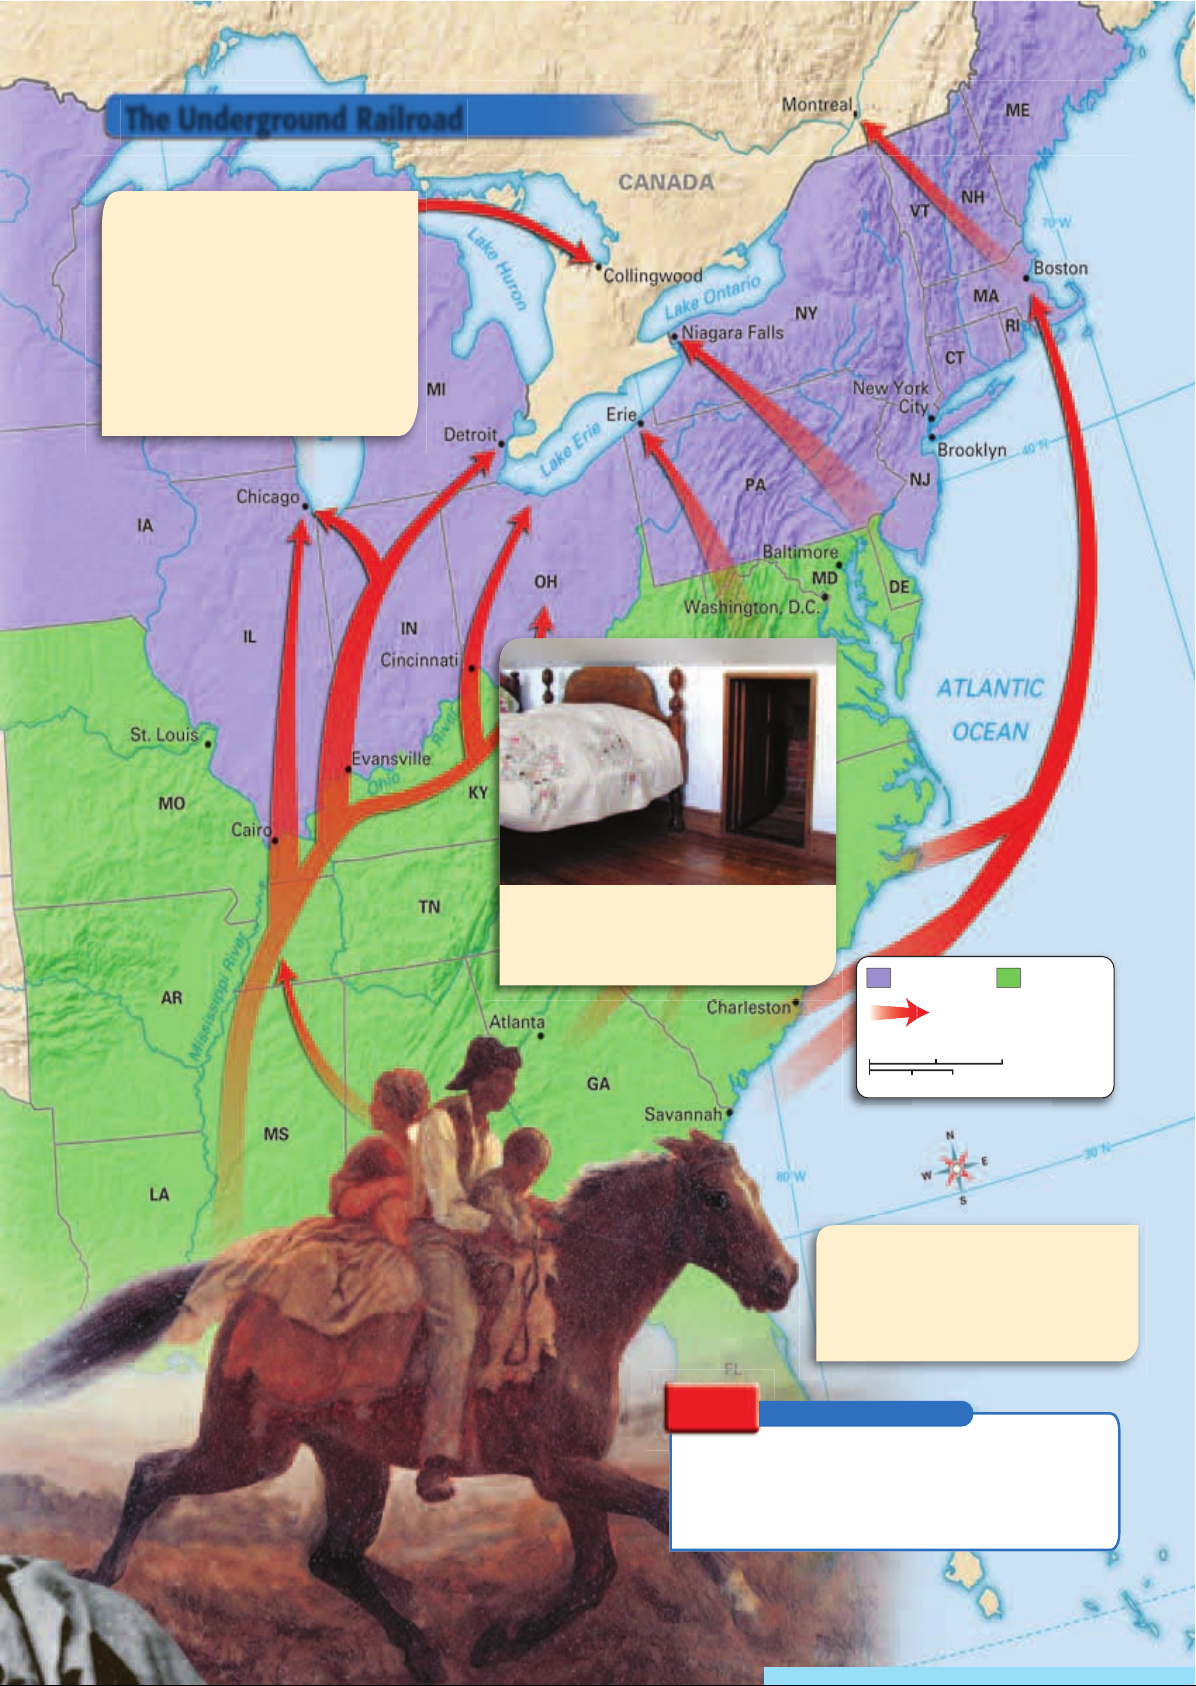 US_History_Textbook_8th_Grade_Chapter_13_New_Movements_in_America_2UZq58l Image-21